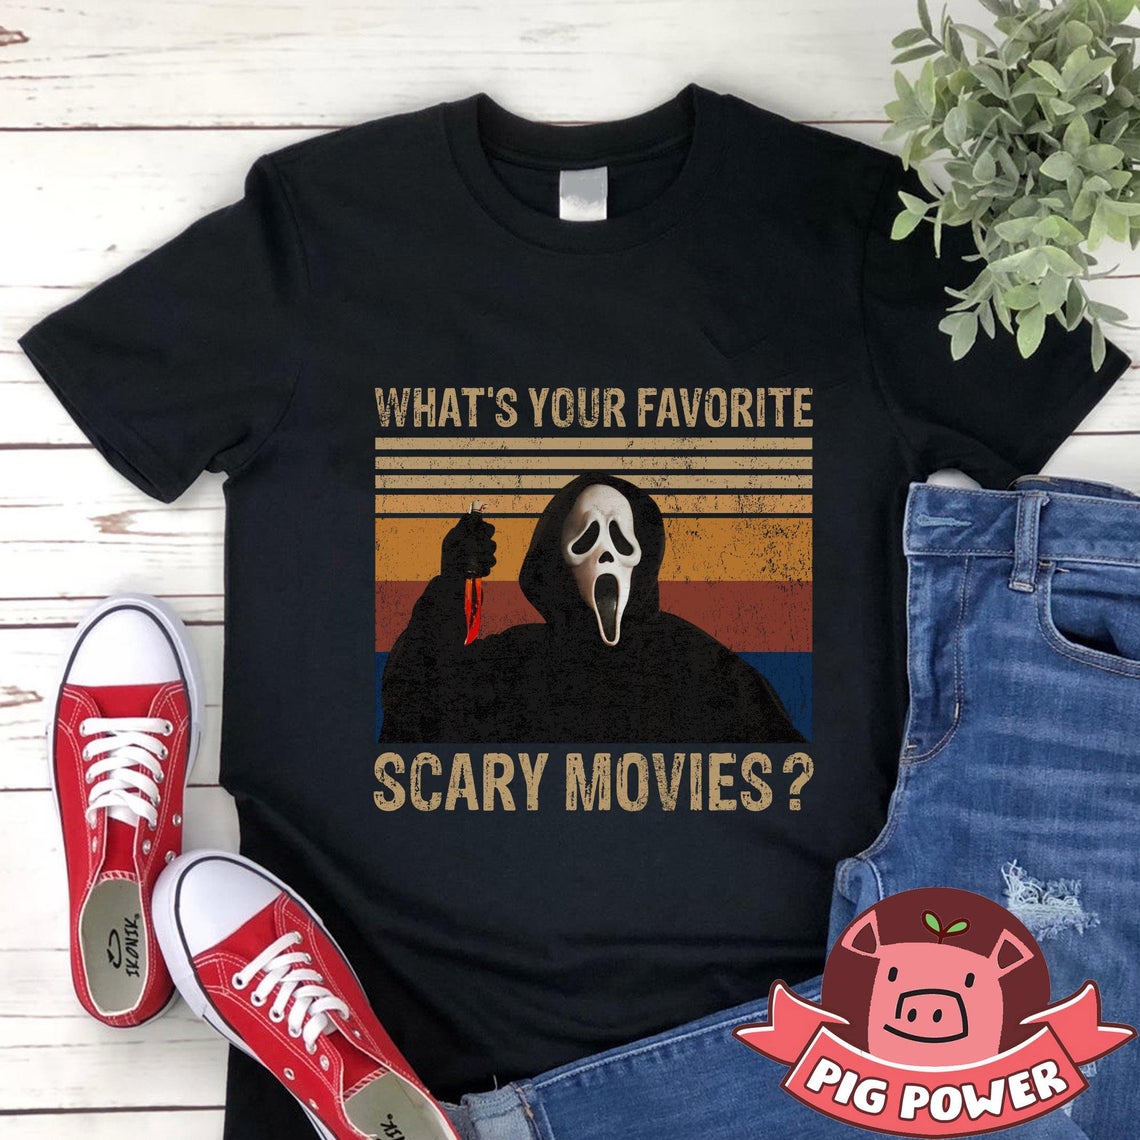 Whats Your Favorite Scary Movie Shirt Vintage Ghostface T-shirt ...